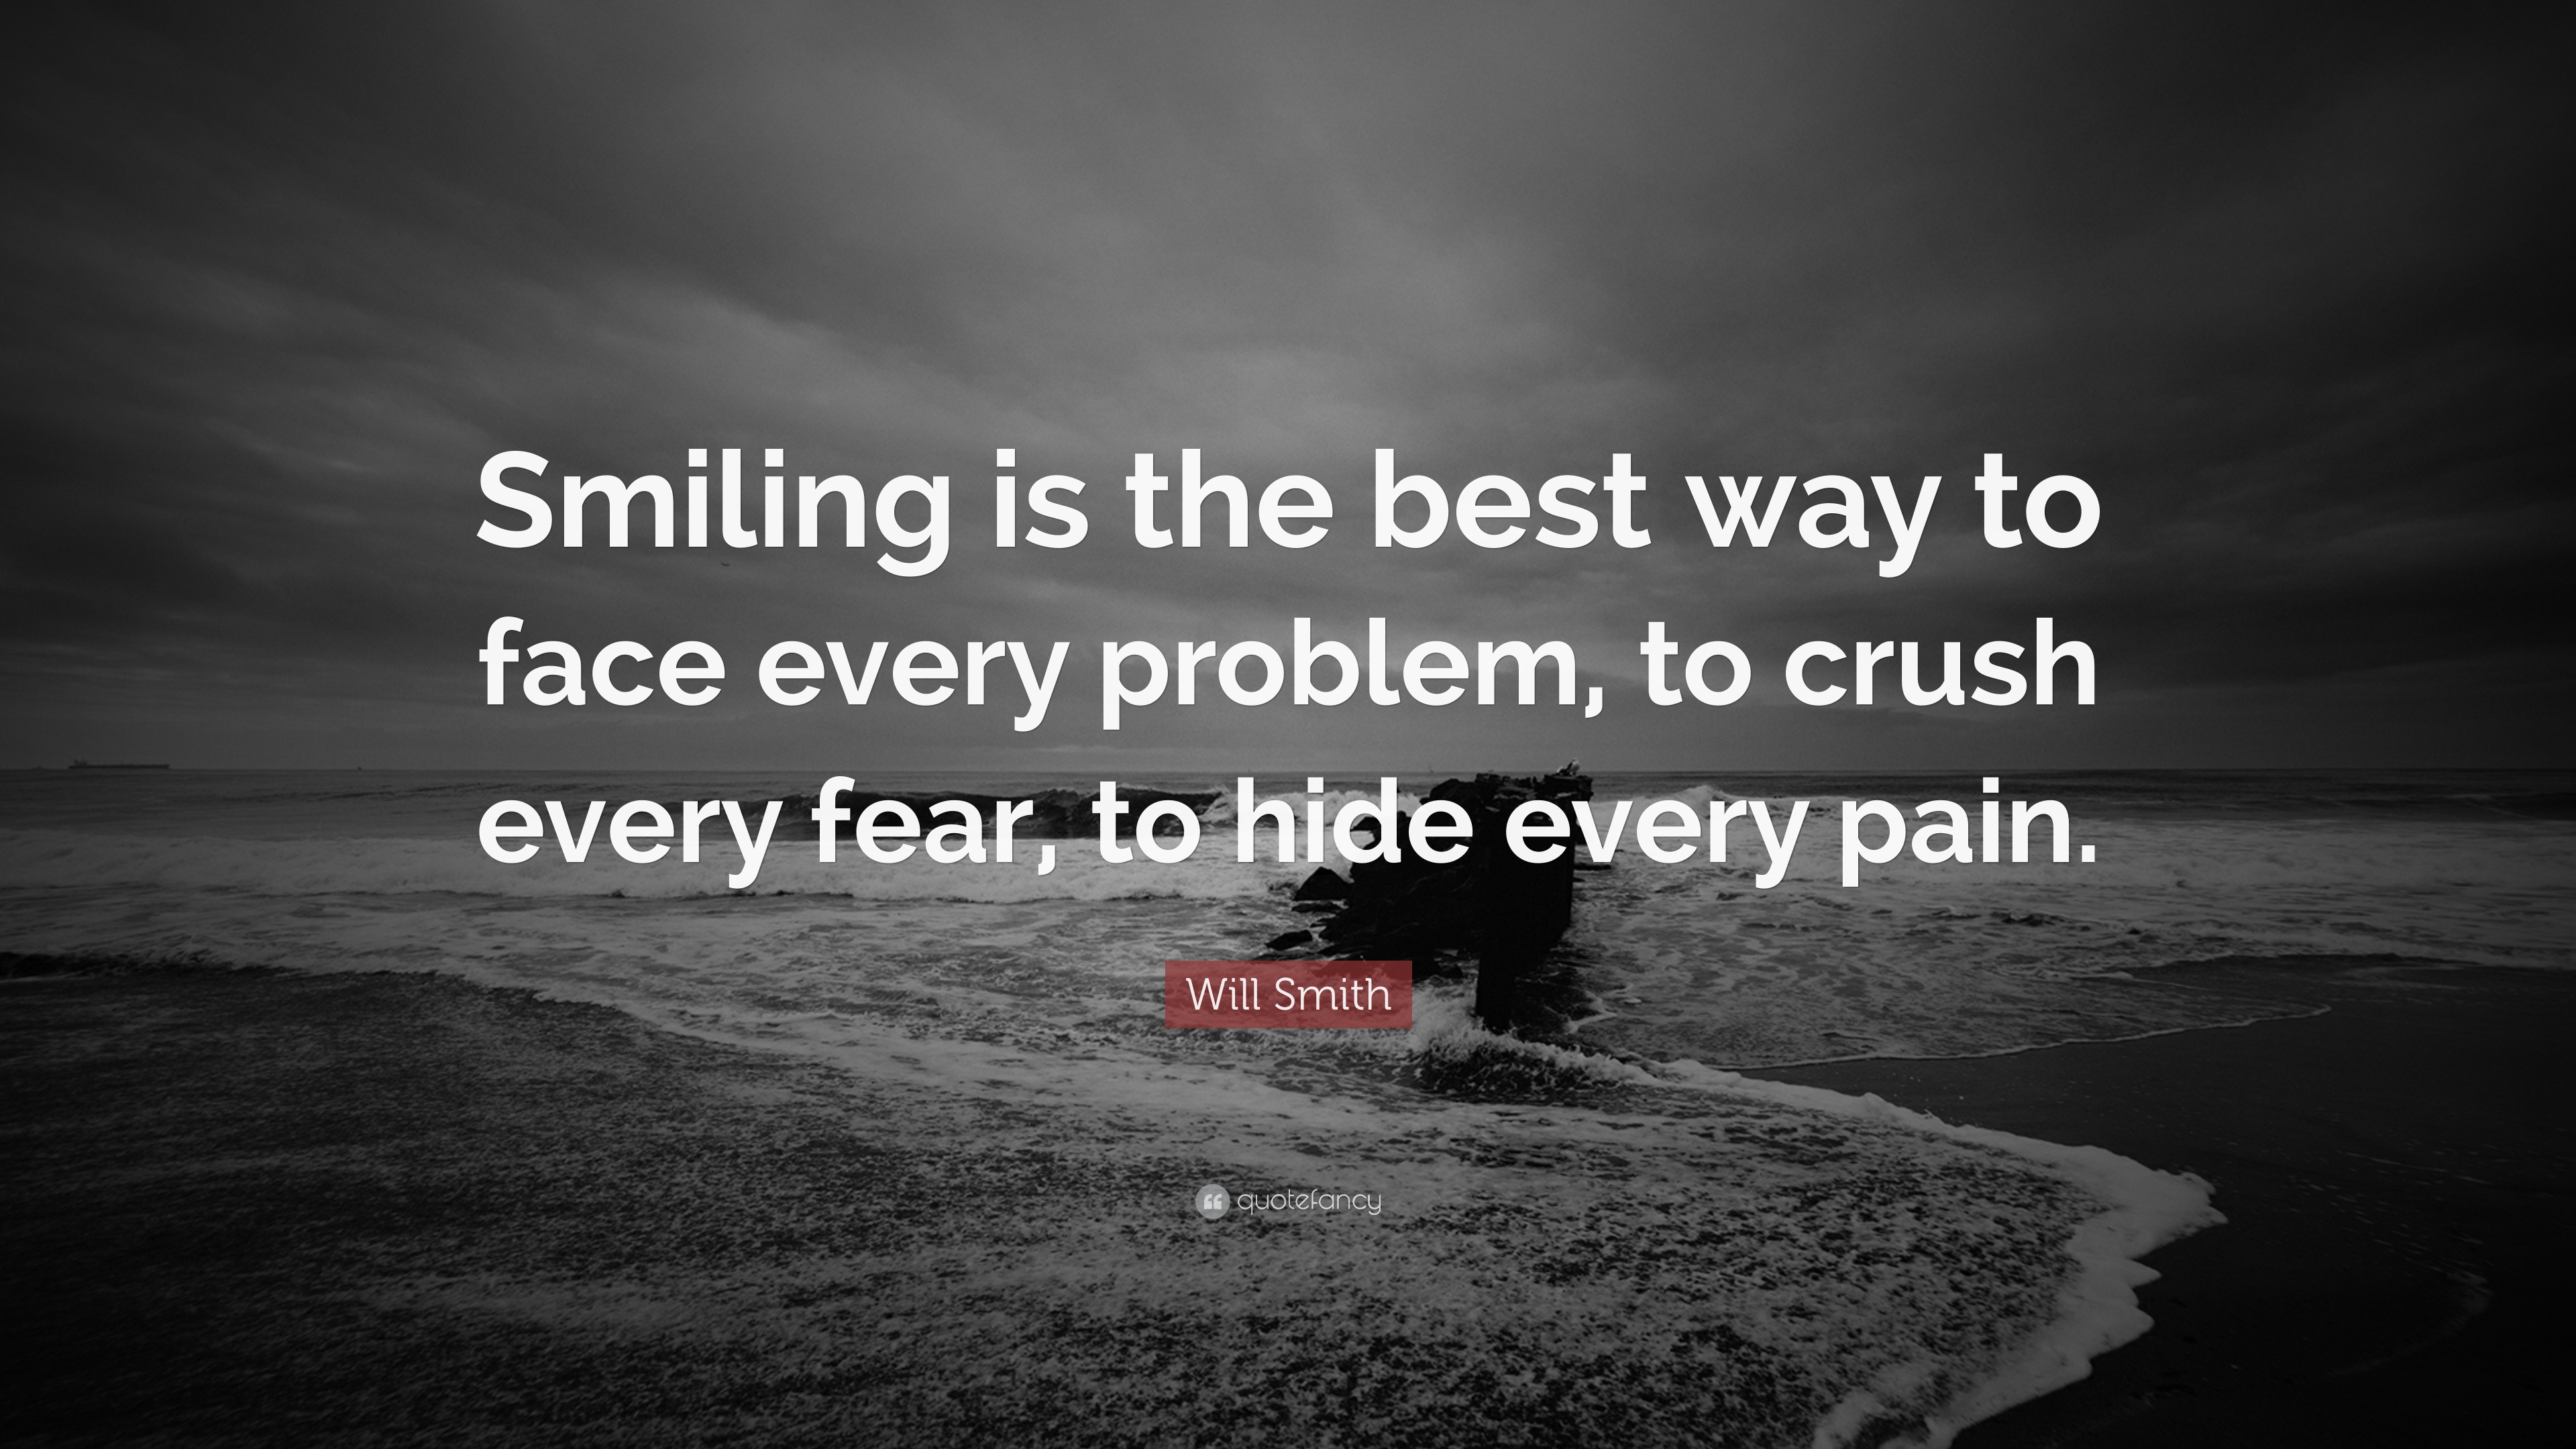 Will Smith Quote Smiling Is The Best Way To Face Every Problem To Crush Eve...